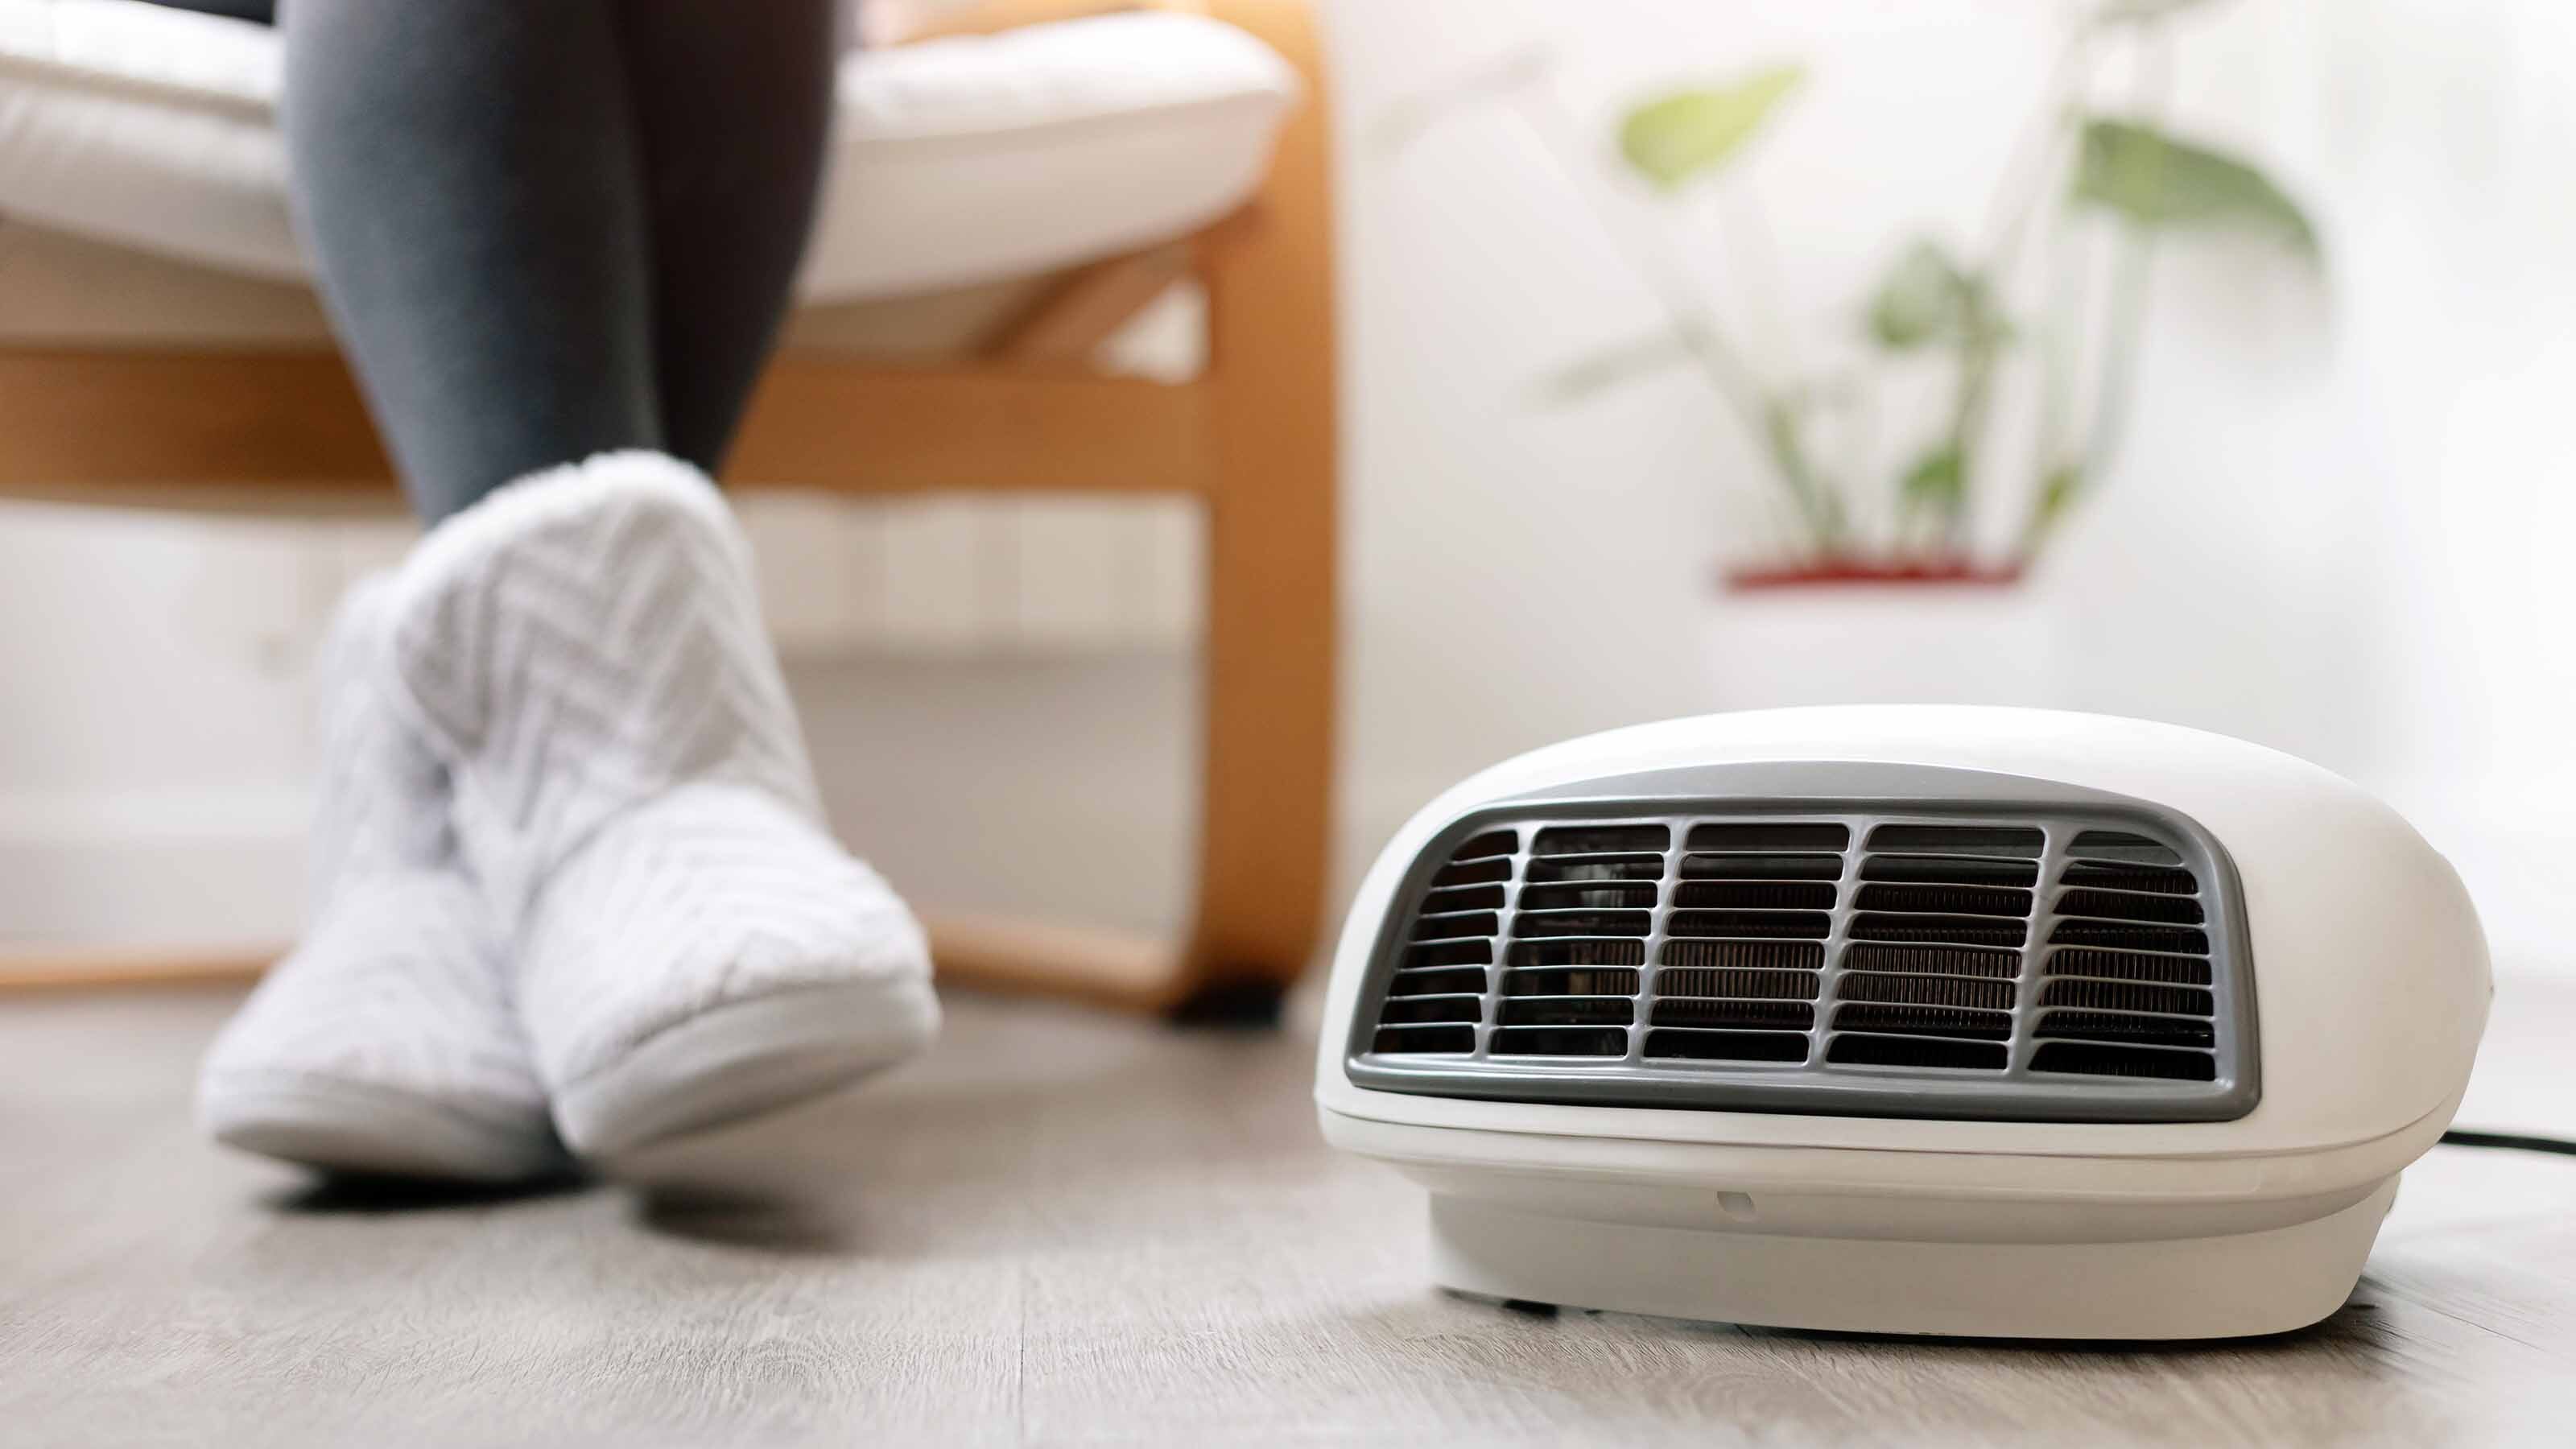 Space Heater Safety Guide: How to Run a Space Heater Without Risk of Fire -  CNET